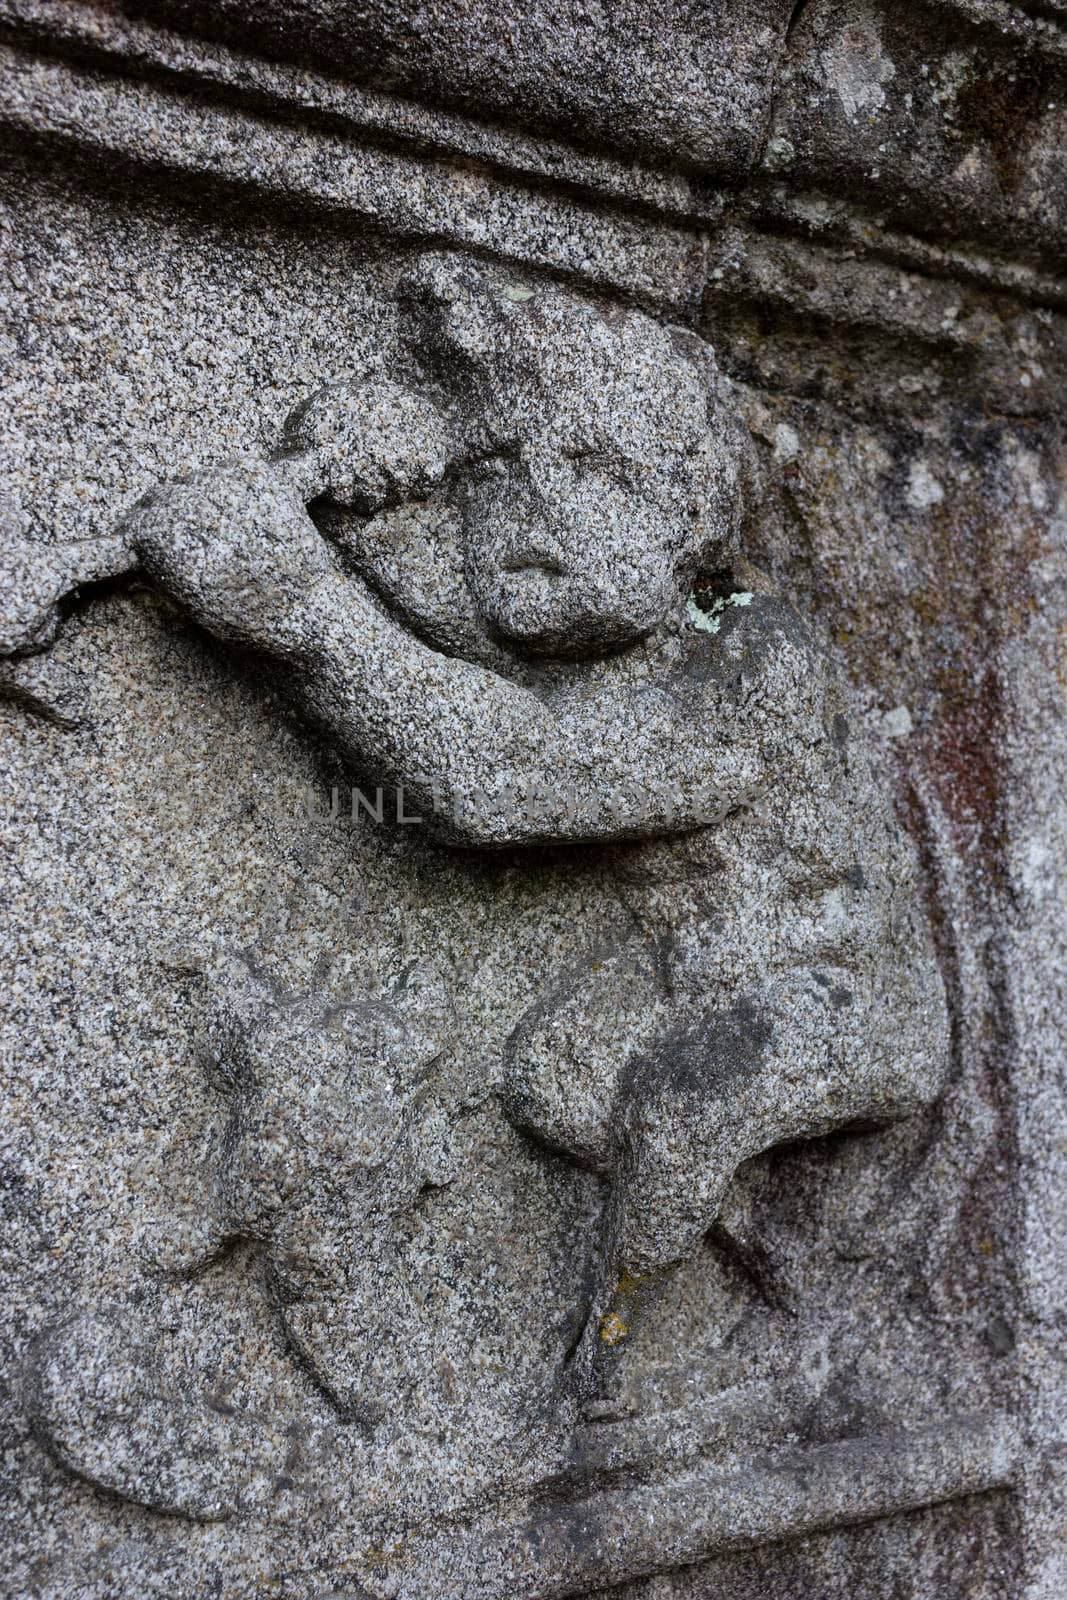 Granite bas-relief worn by the past of the time, in Galicia Spain